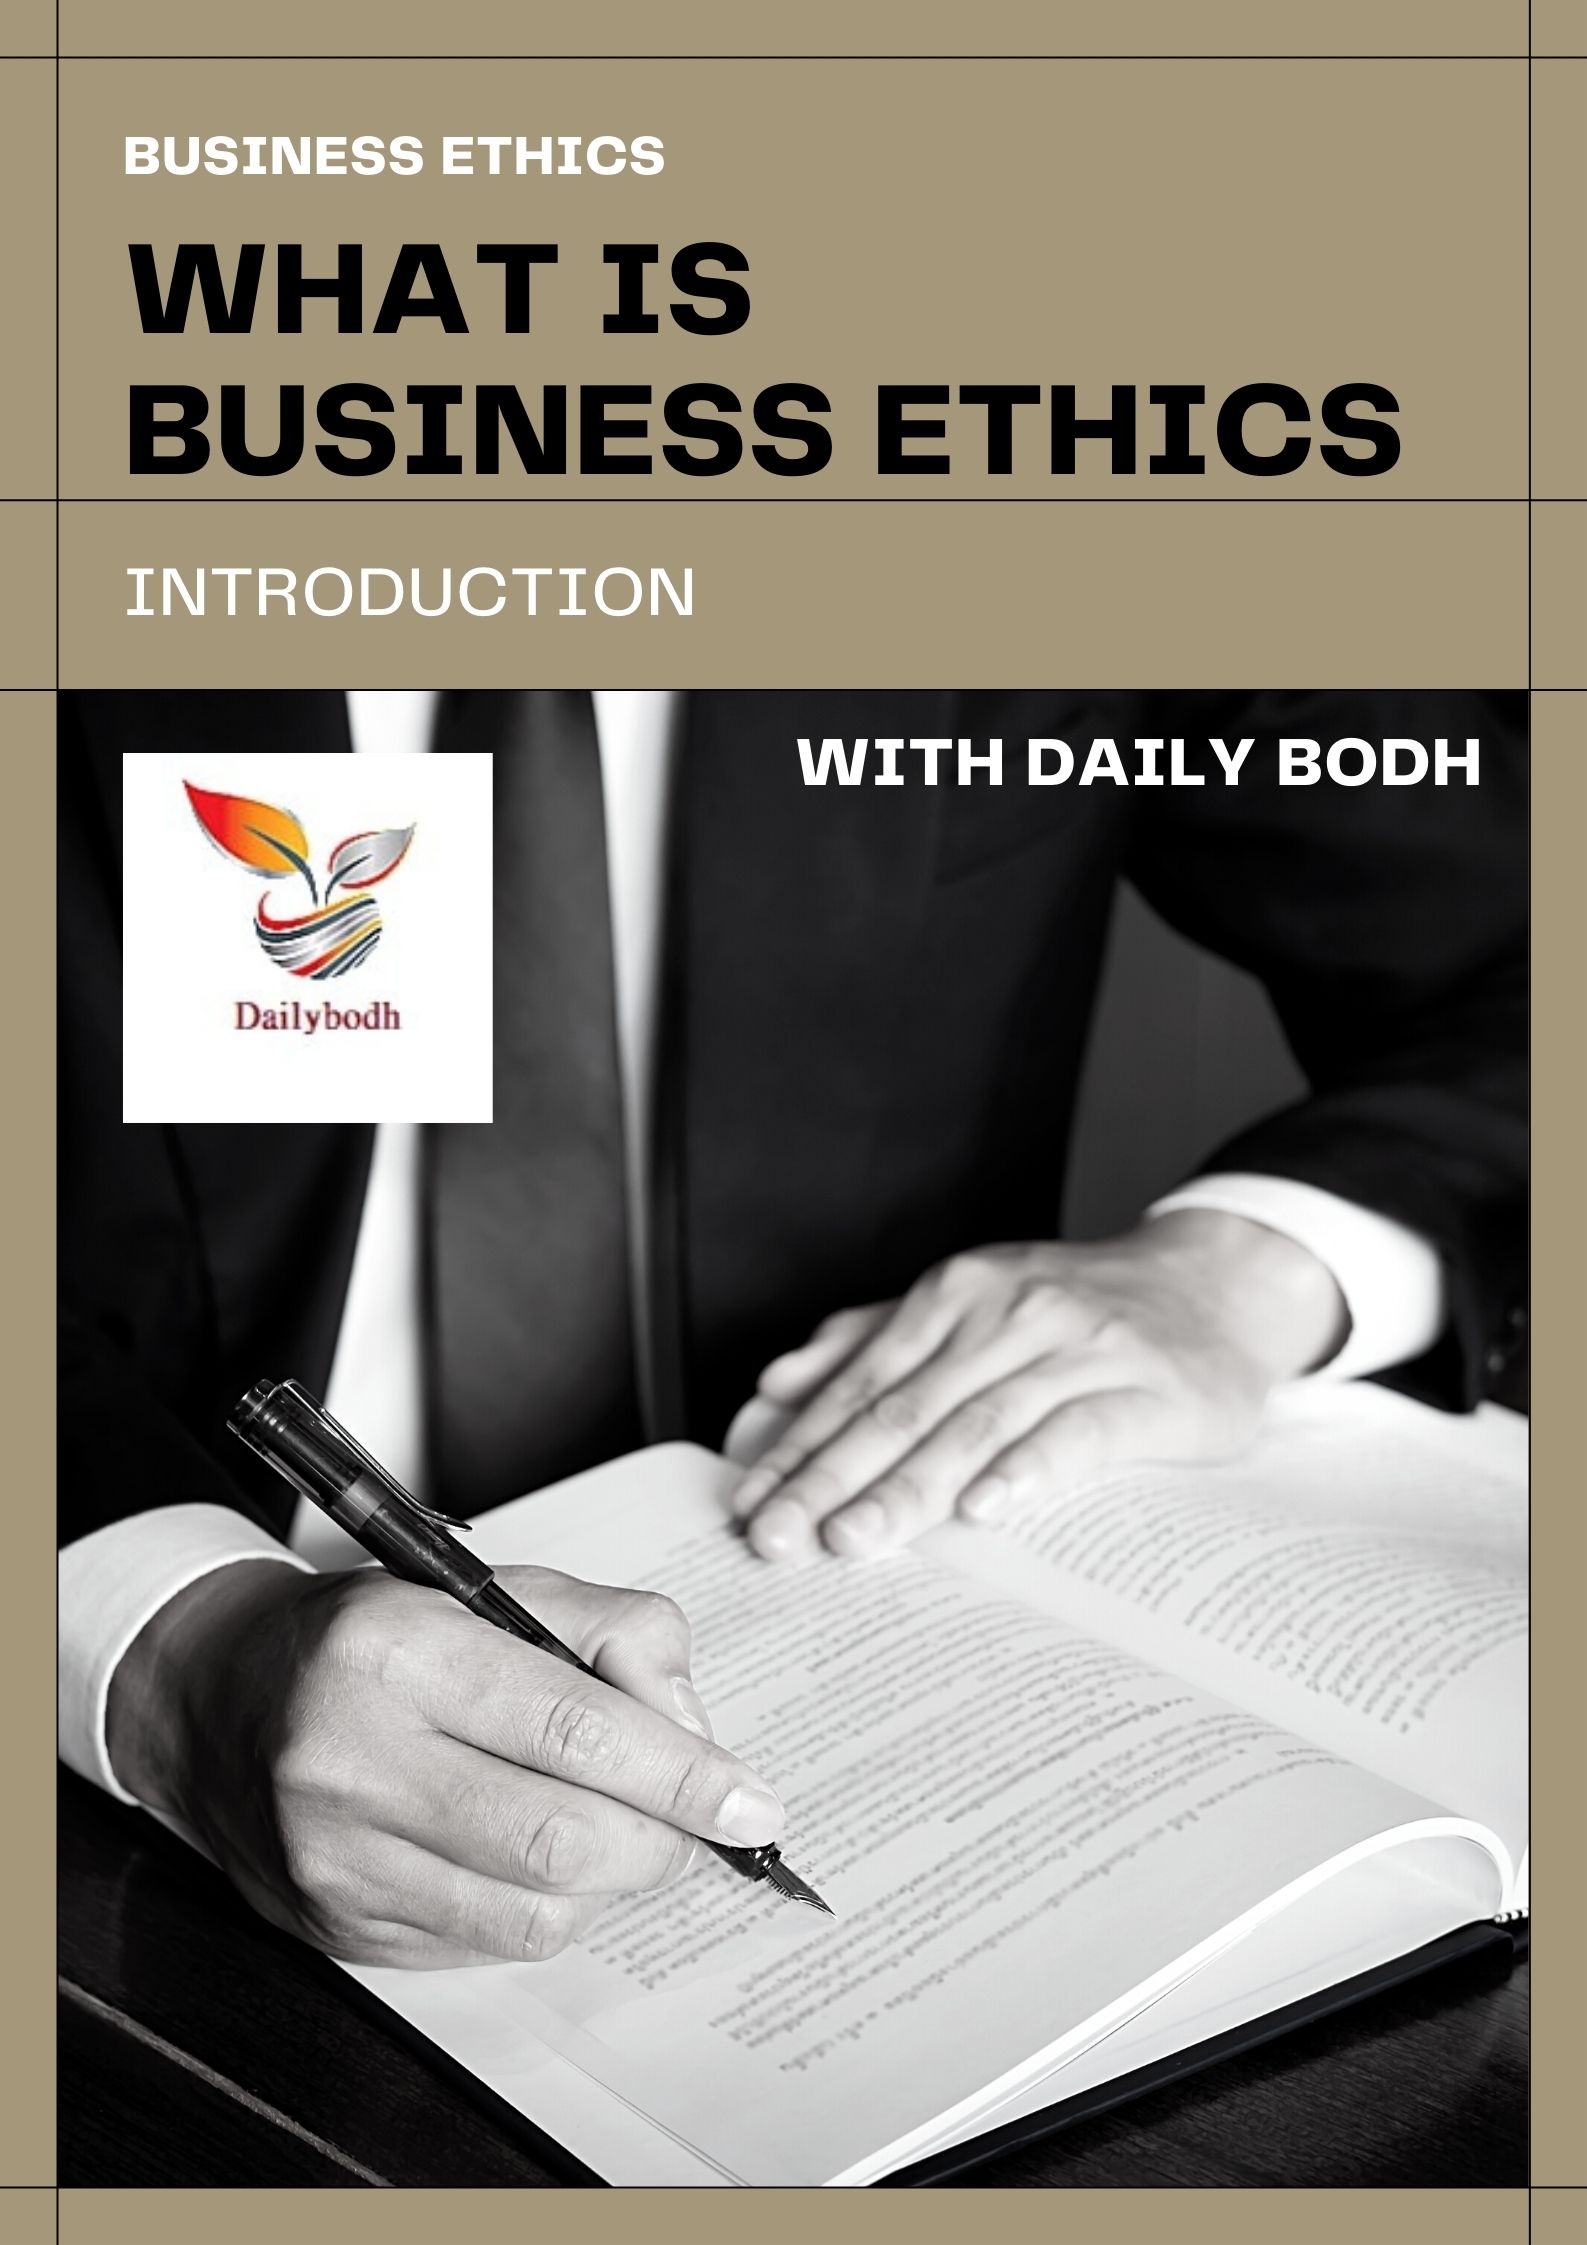 Introduction(What is Business Ethics)